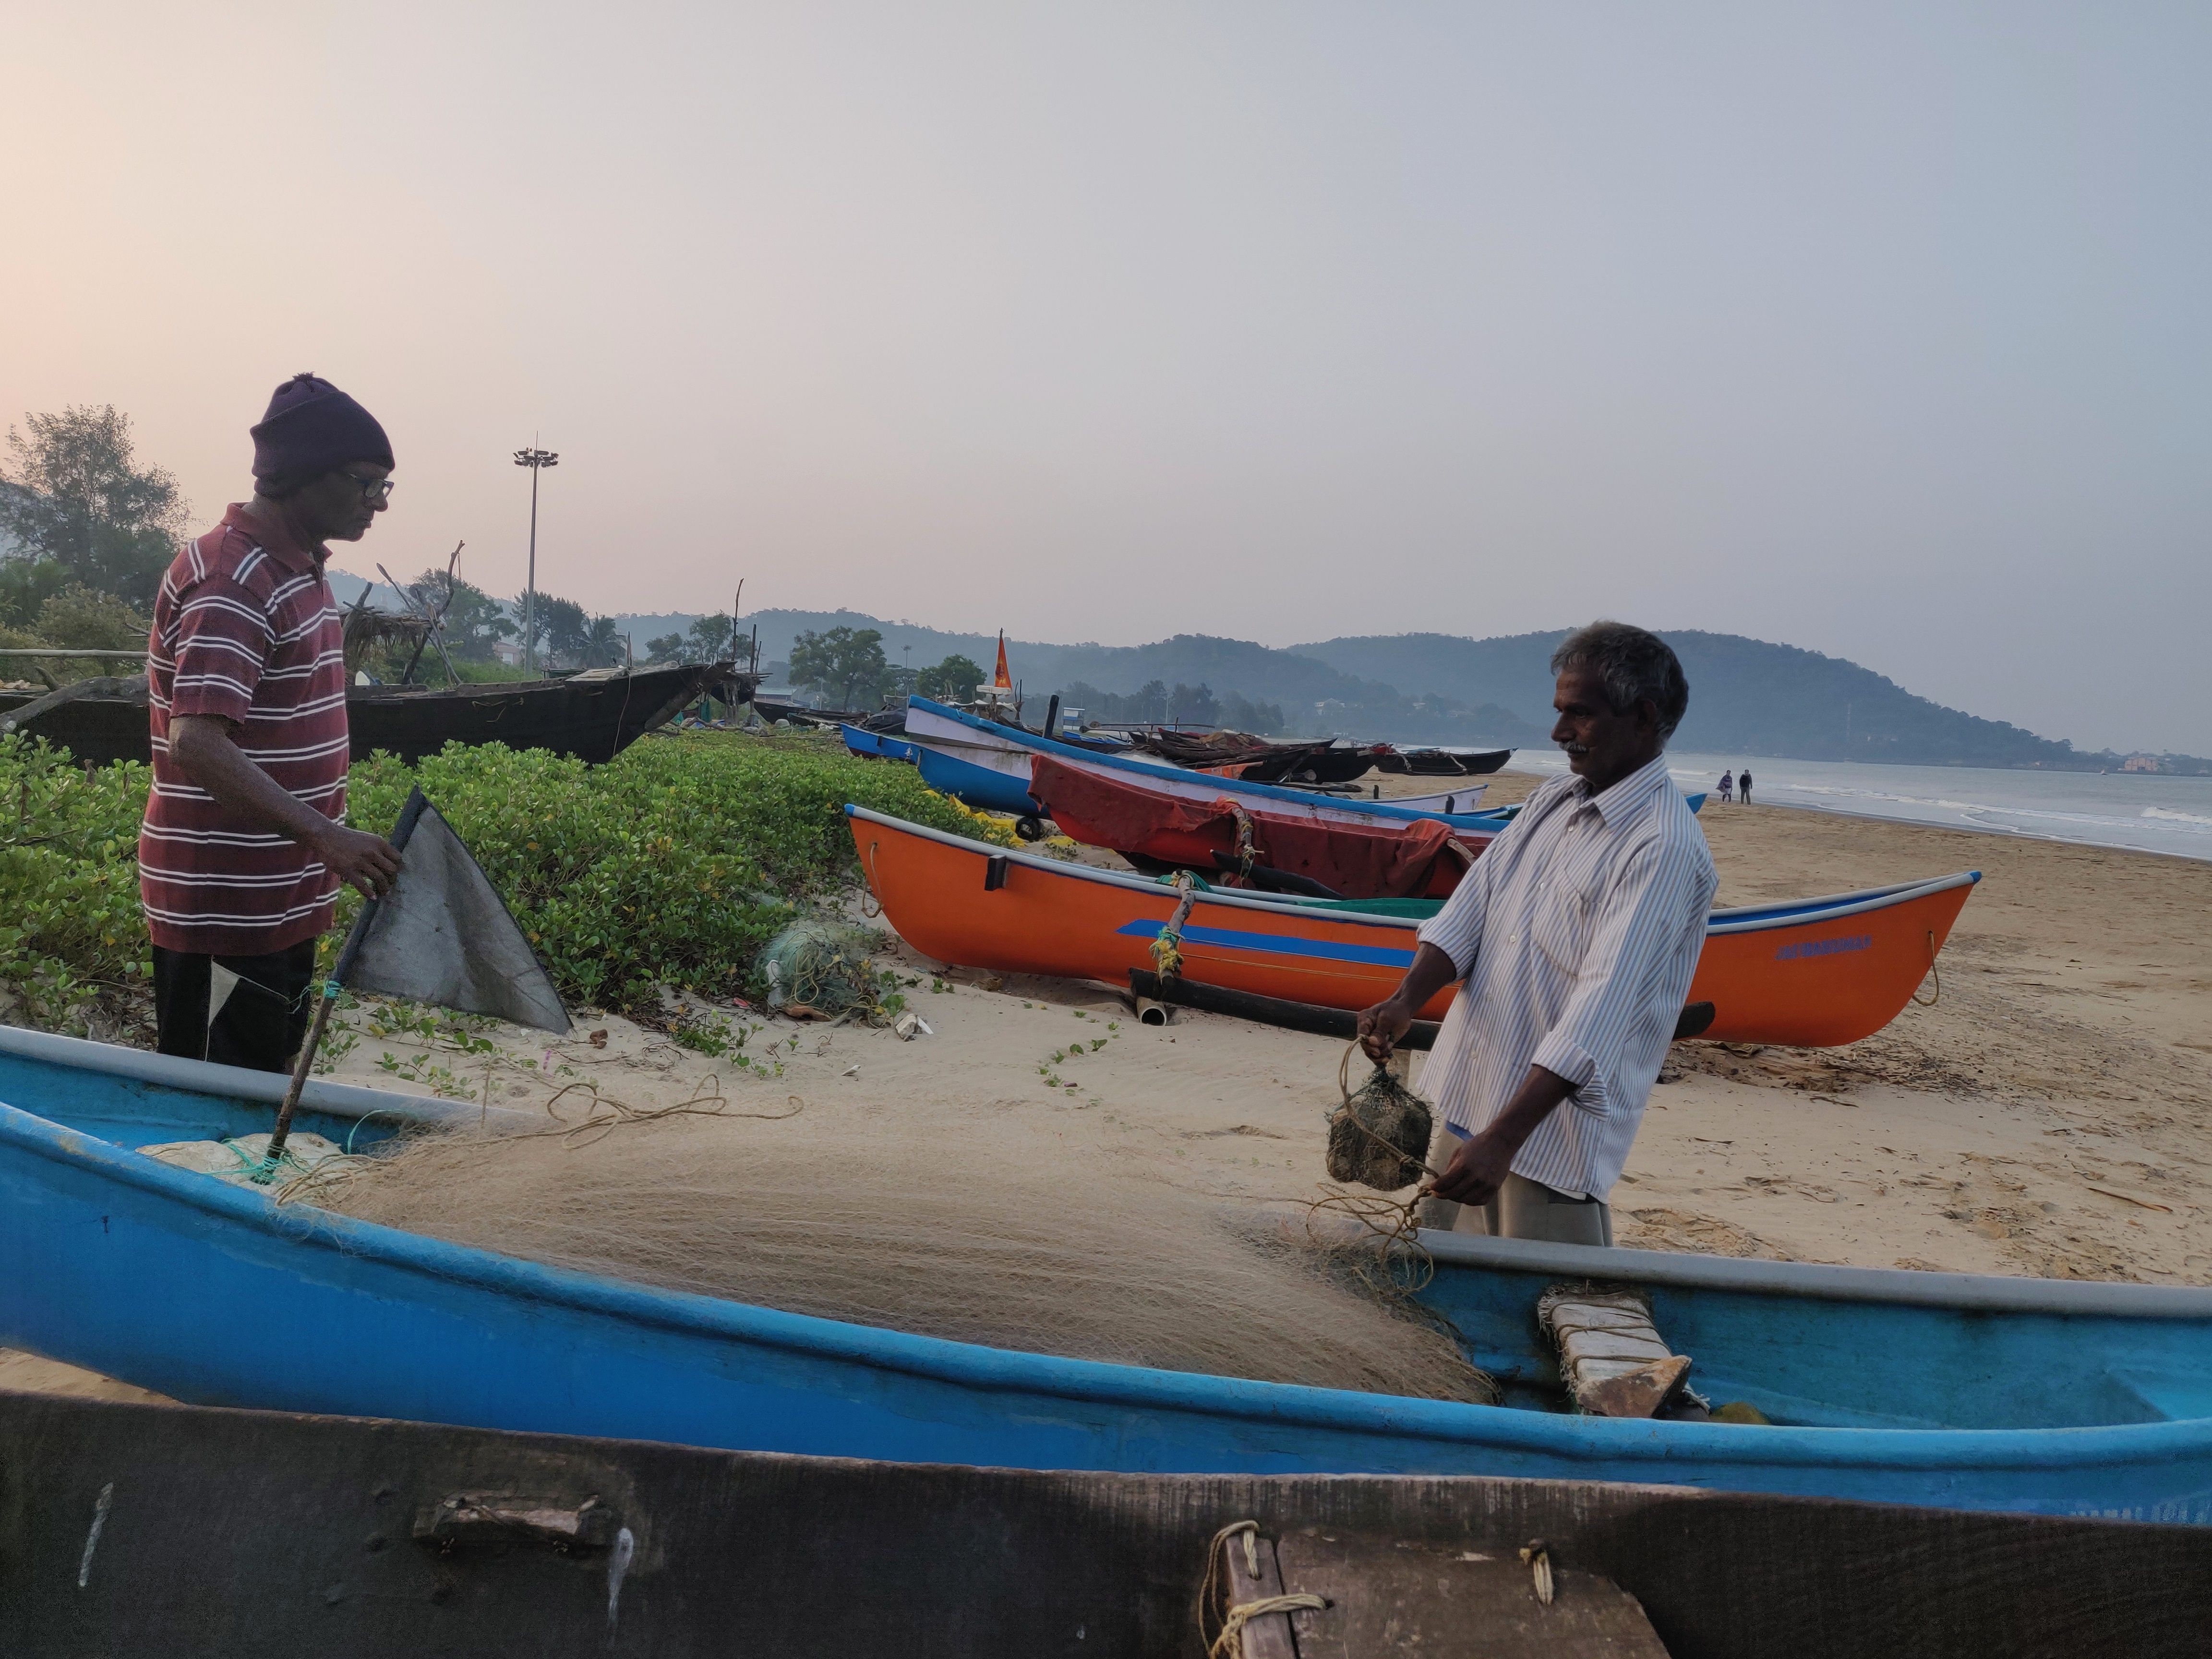 Sadanand Malshekar (right), 62, is among the thousands of fisherfolk who are worried that the Karwar port’s expansion will pollute the water in the fishing harbour and damage the beach they use to anchor their boats. Image by Disha Shetty / IndiaSpend. India, 2020.